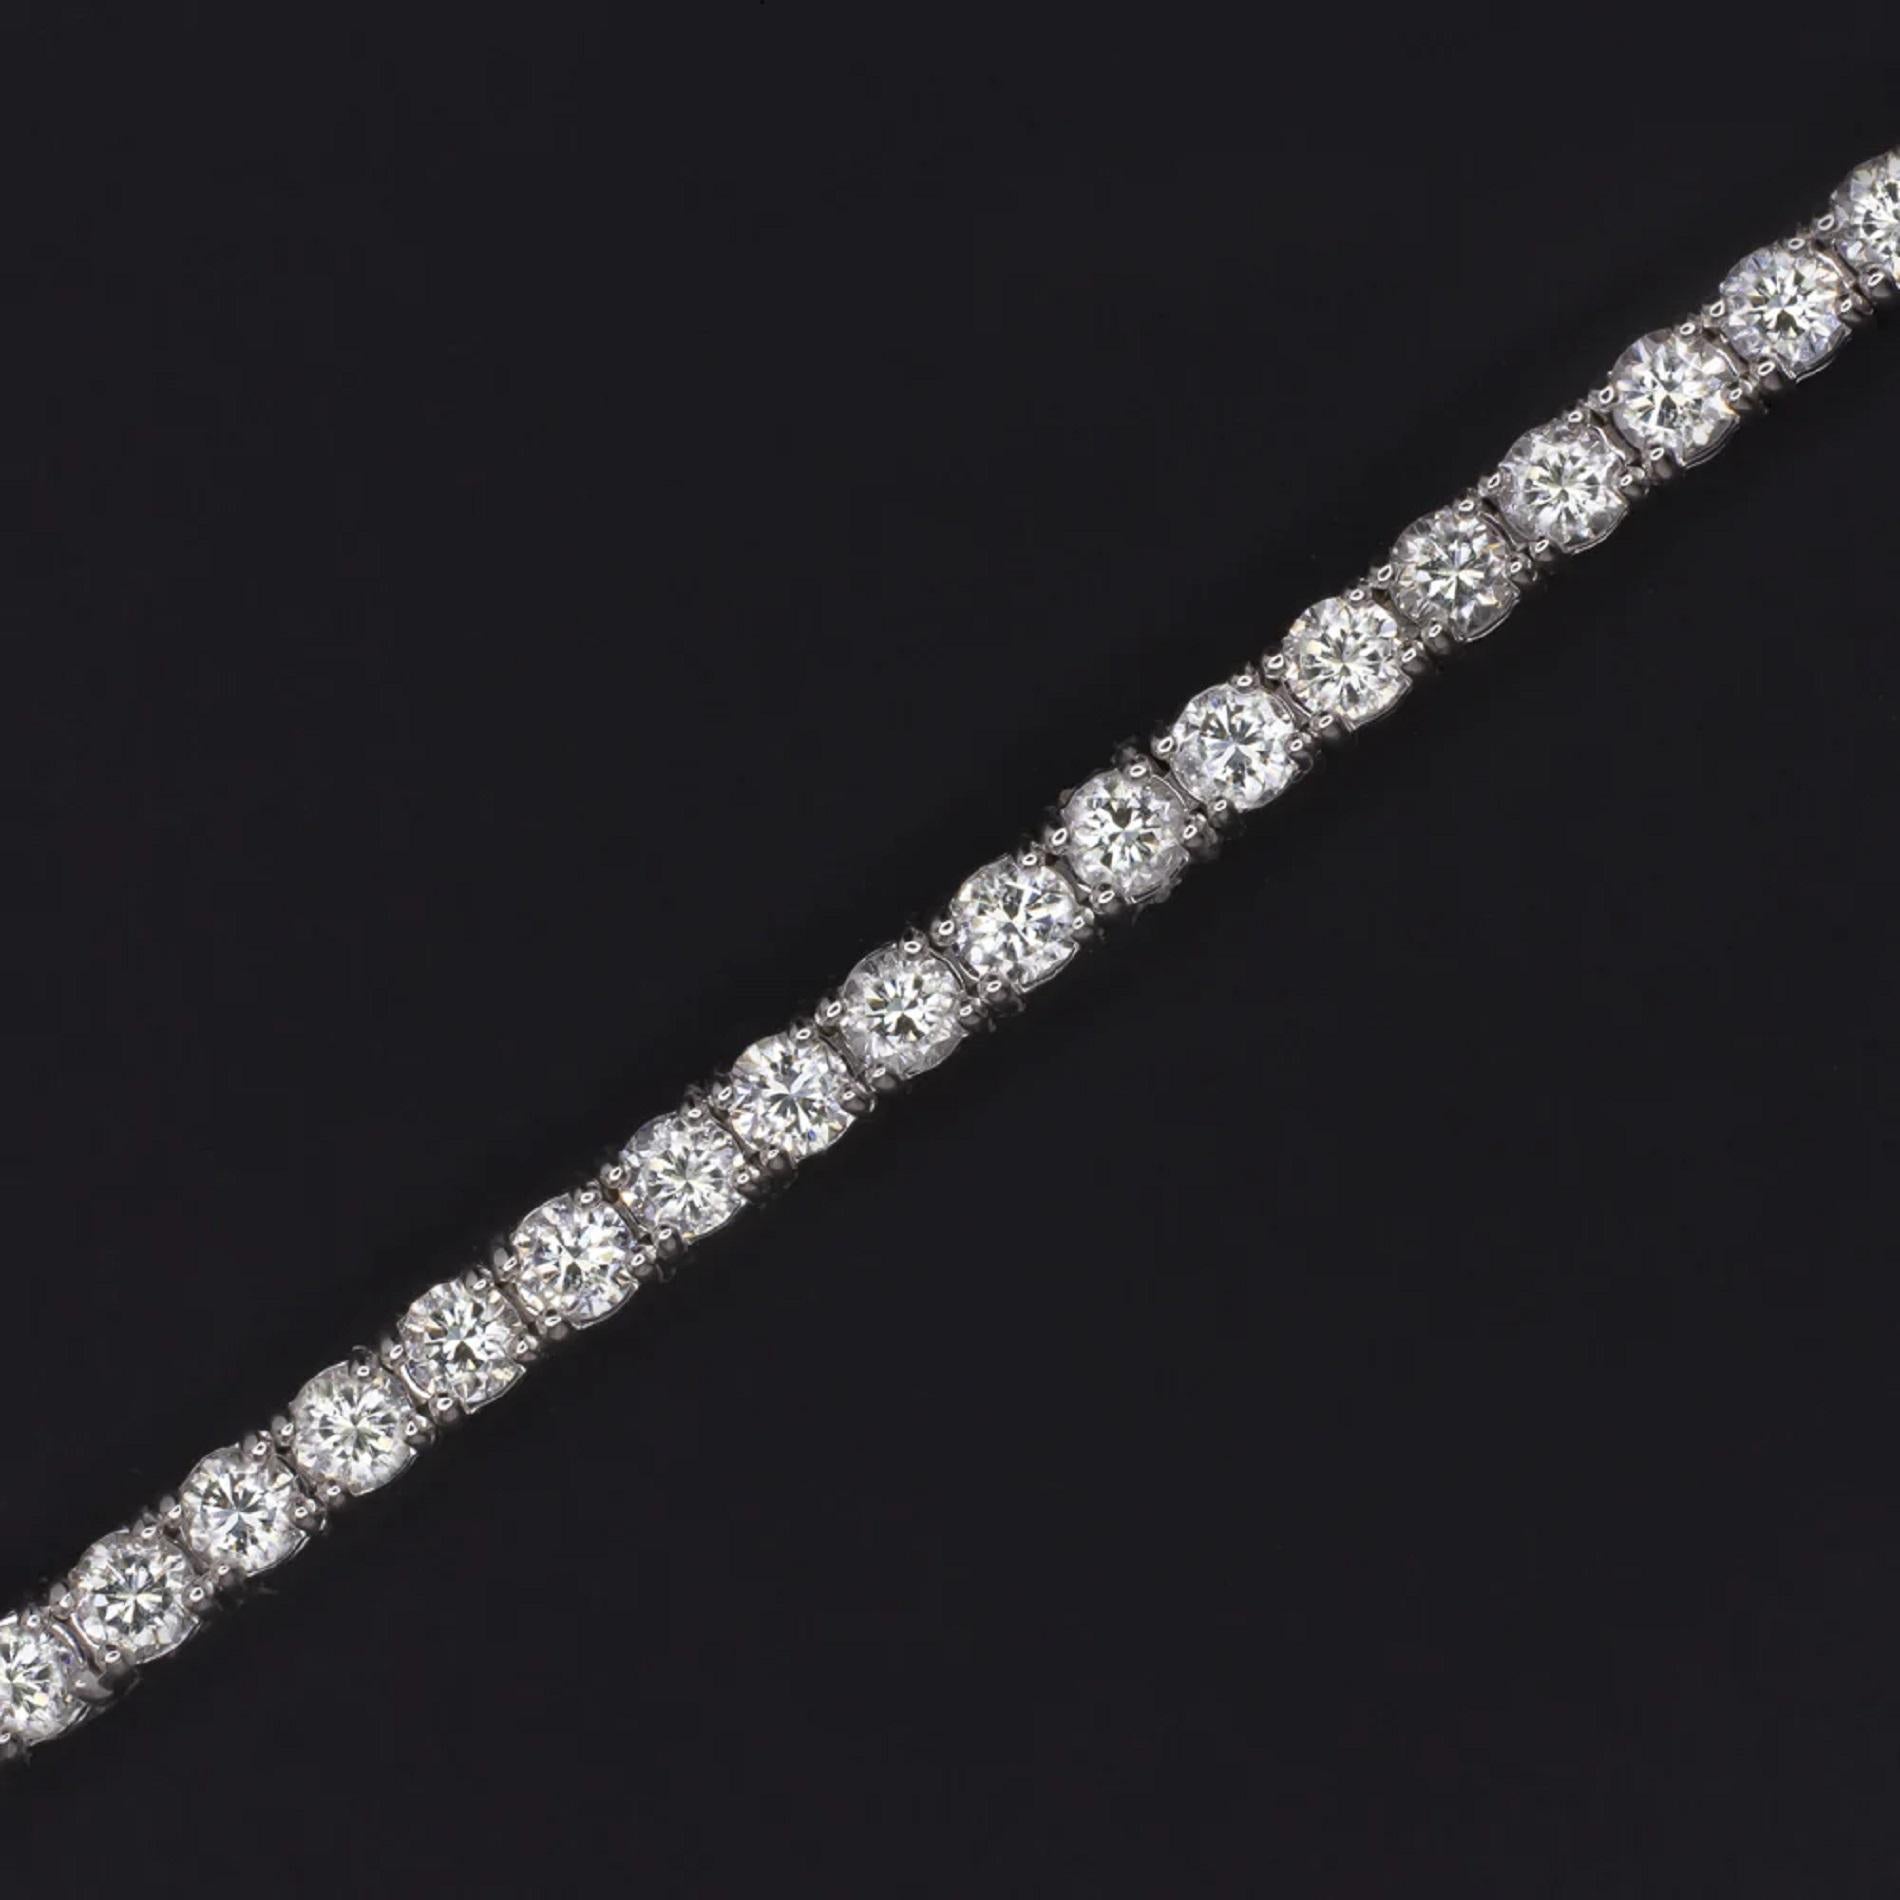 brilliantly sparkling tennis bracelet has a classic design that will never go out of style! Featuring 5 carats of bright white, eye clean diamonds, this beauty offers brilliant, eye catching sparkle. This bracelet is sure to delight and would make